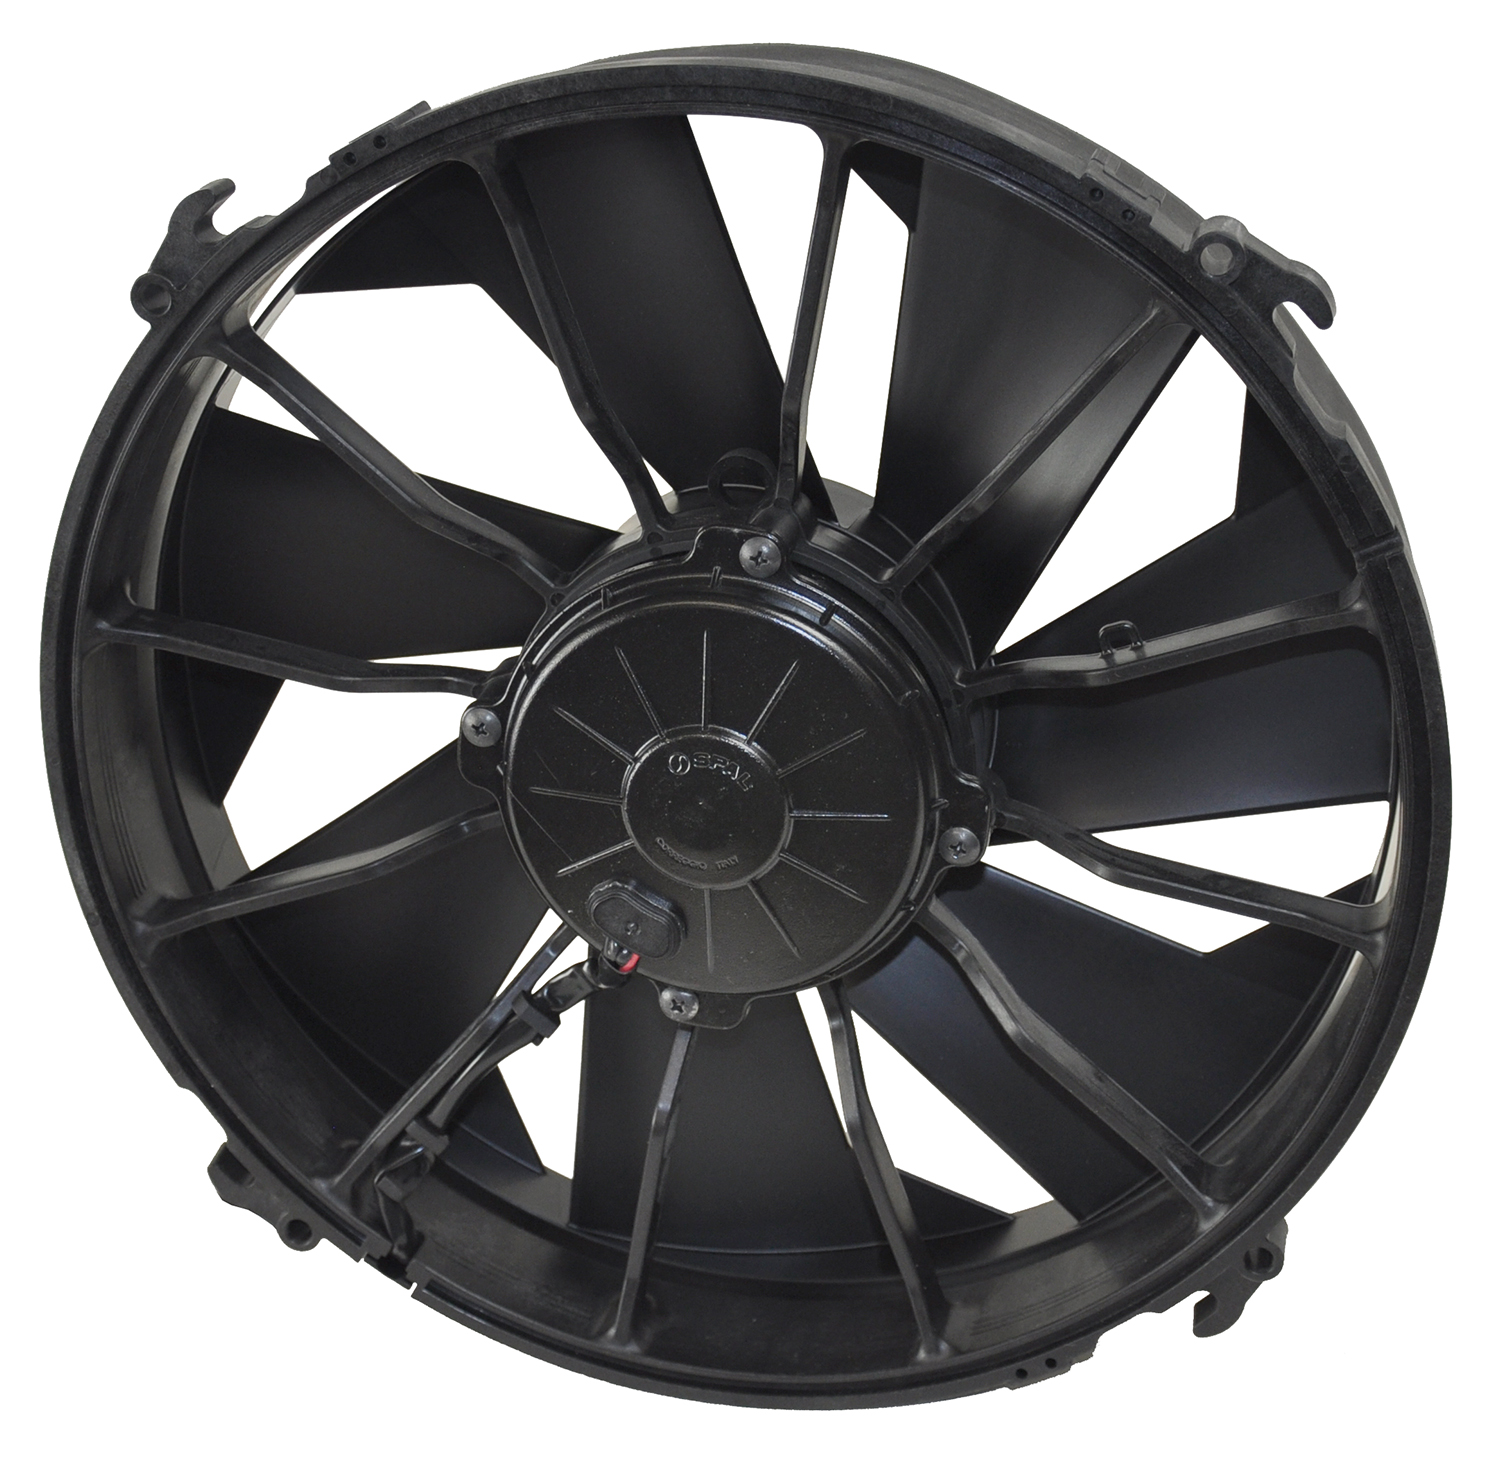 12" High Output Single RAD Pusher/Puller Fan with Standard Mount Kit